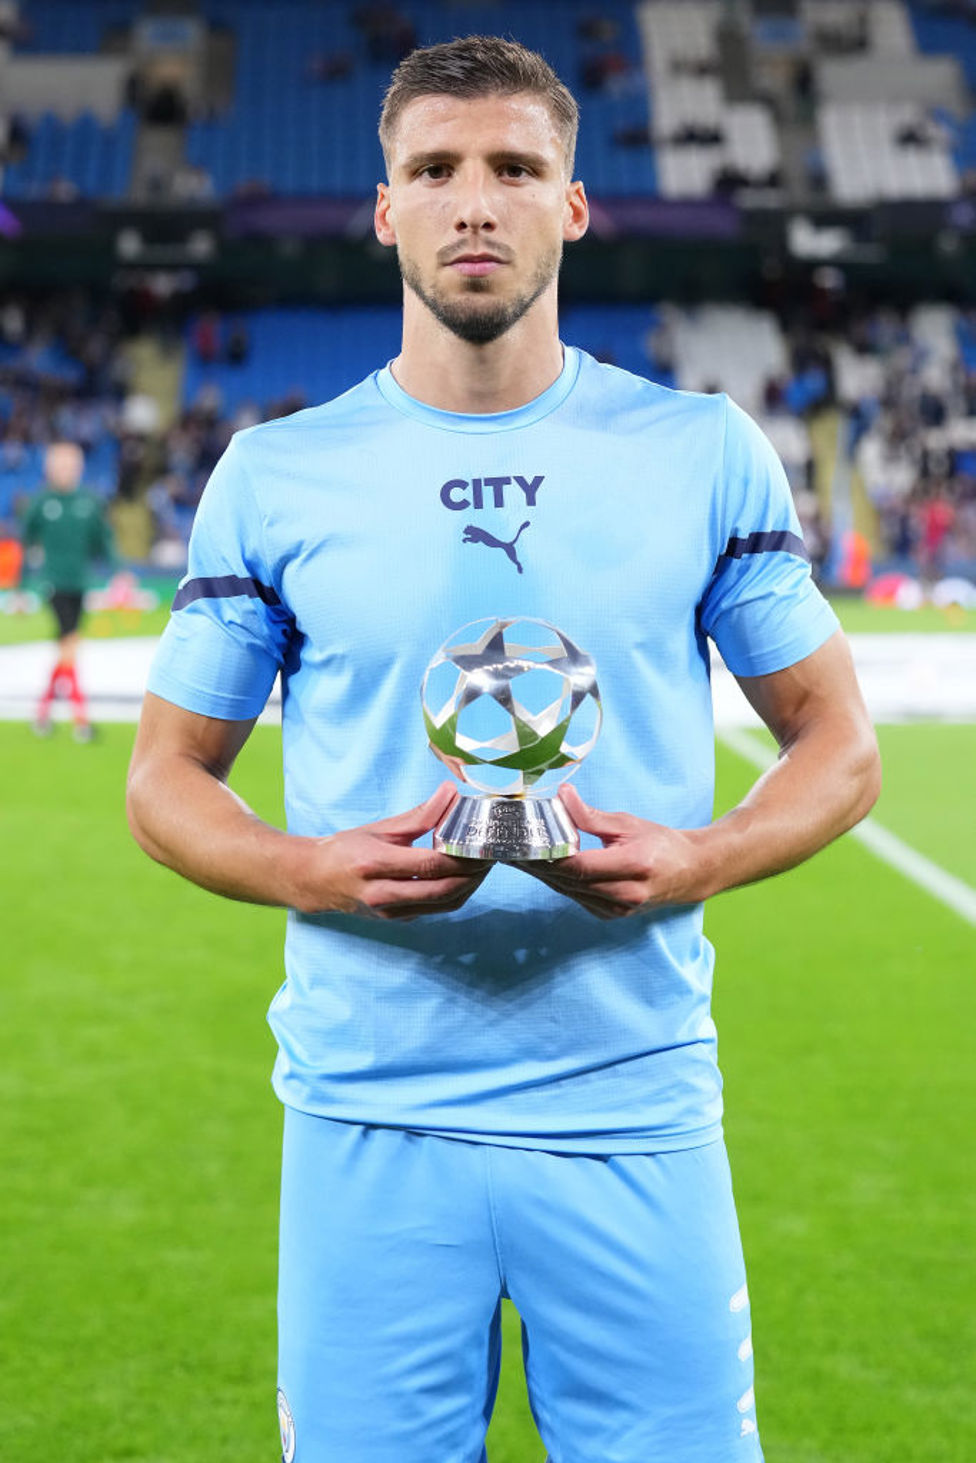 DEFENDER OF THE YEAR : You're looking at Europe's best defender - Ruben Dias.